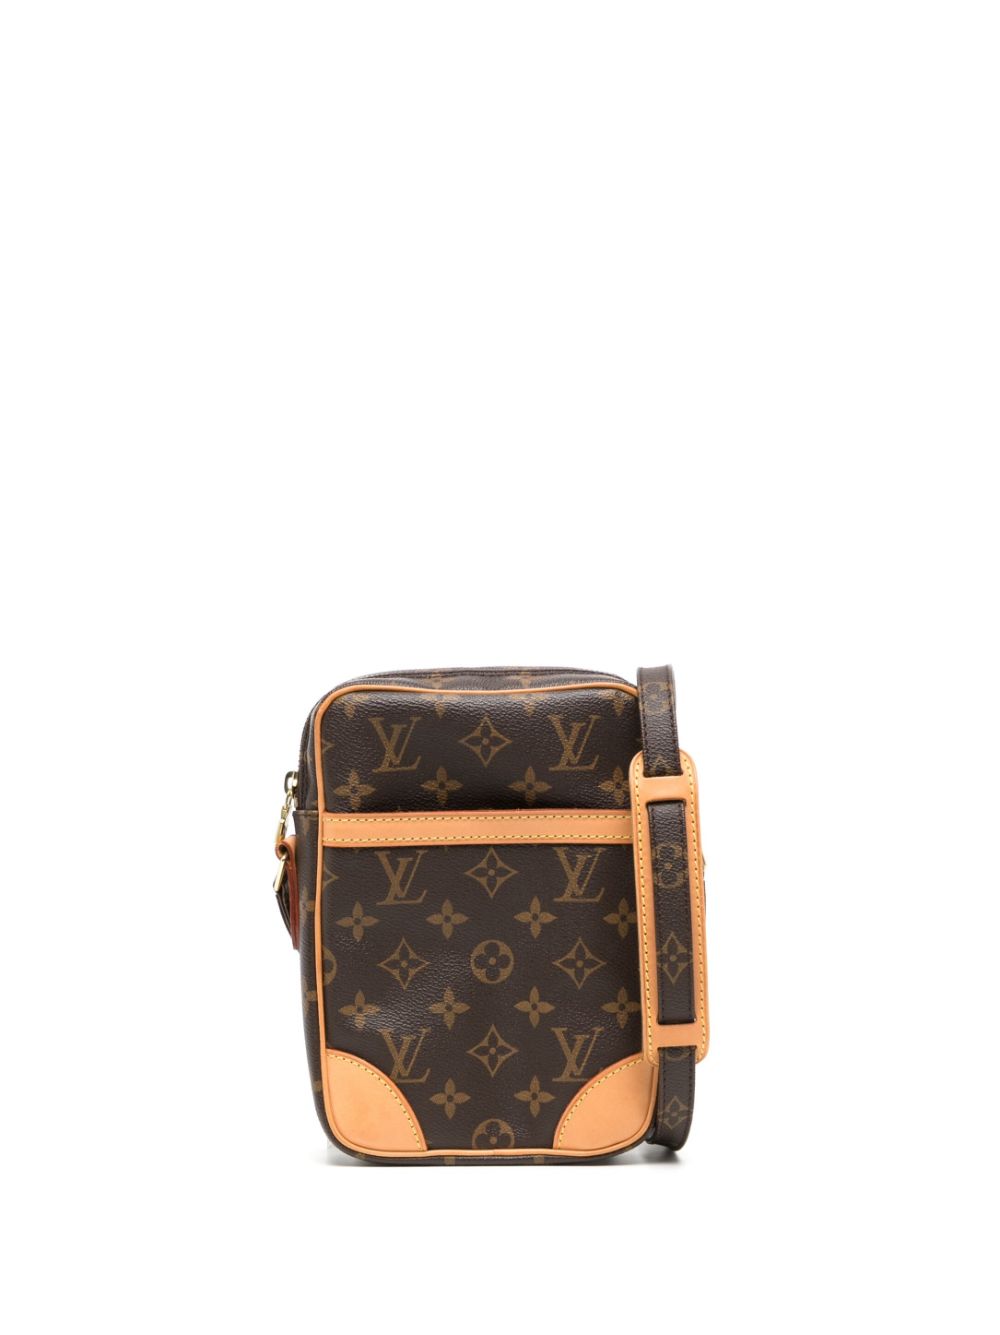 Louis Vuitton 2011 pre-owned Monogram Cosmetic Pouch - Farfetch